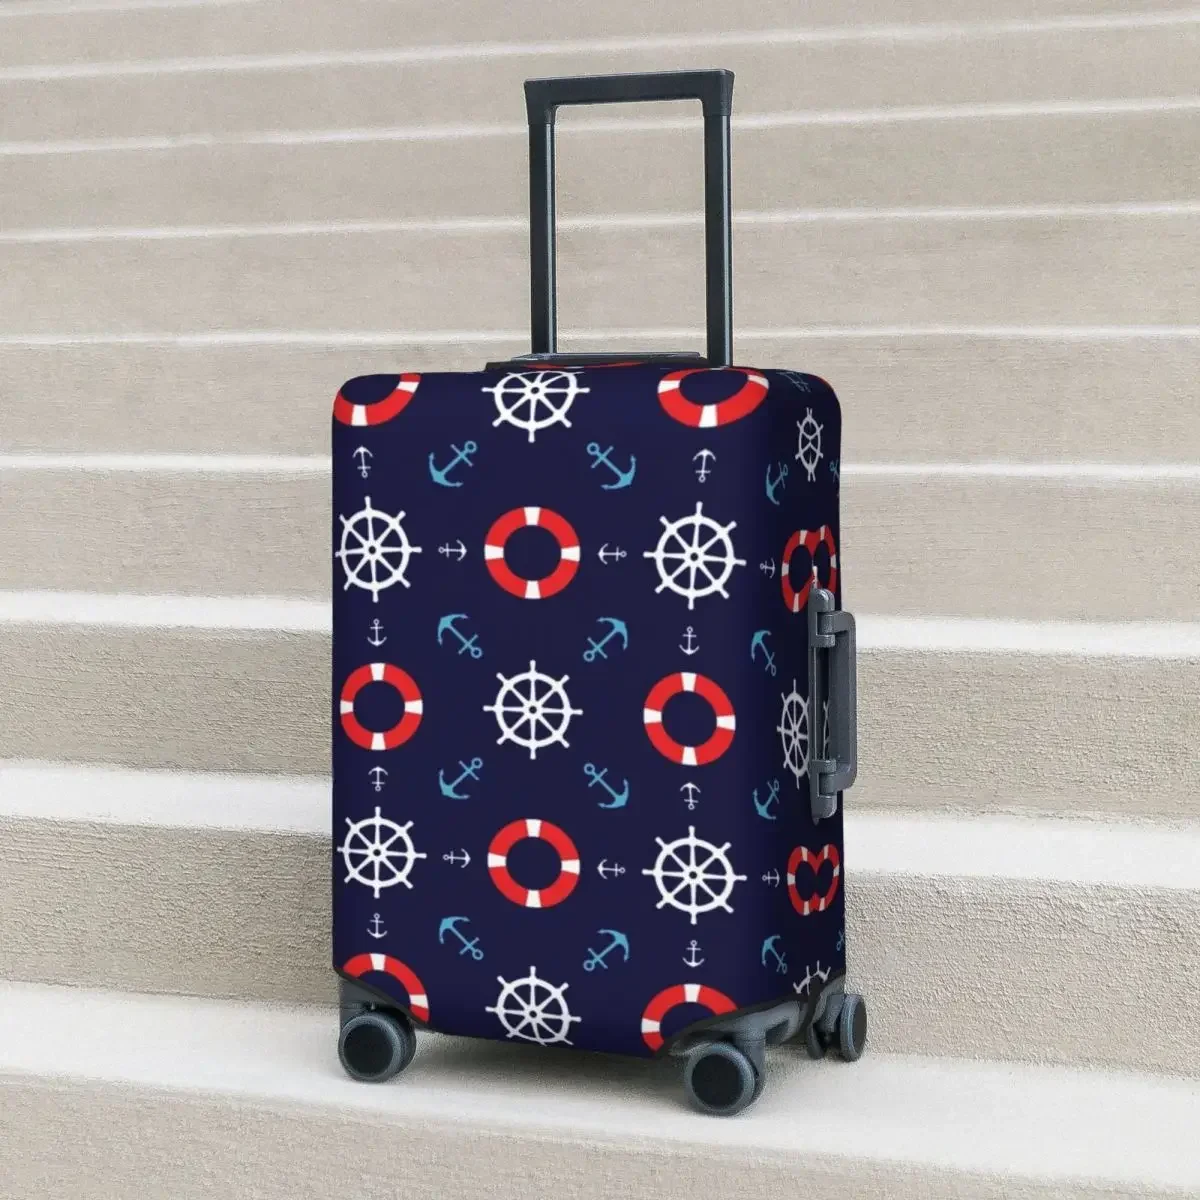 

Nautical Sailors Pattern Suitcase Cover Anchor Print Business Vacation Strectch Luggage Accesories Protector